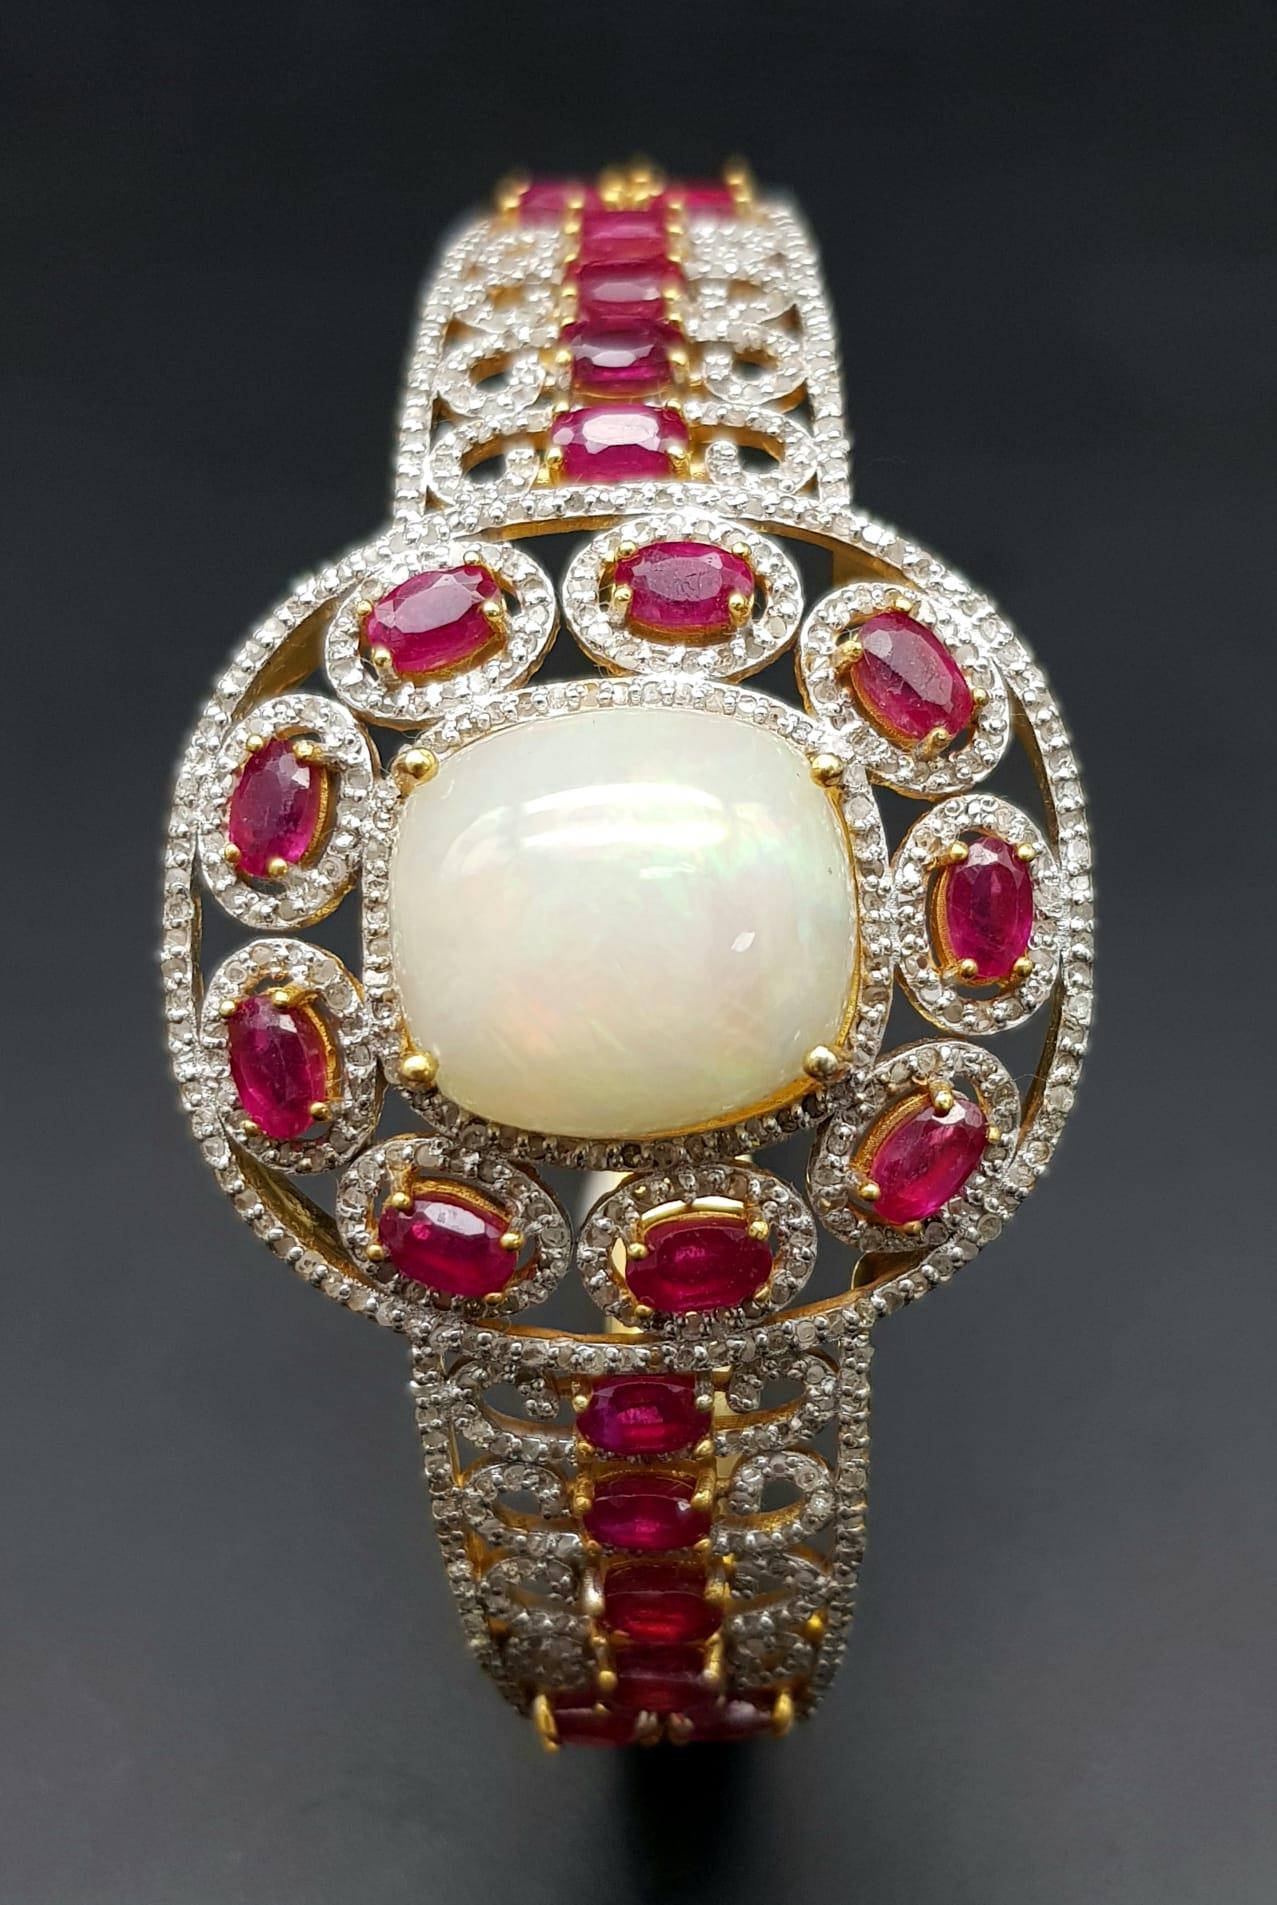 A Wonderful Majestic Colour-Play 12ct Opal and Ruby Gemstone Cuff Bracelet with Diamond Accents. - Image 3 of 6